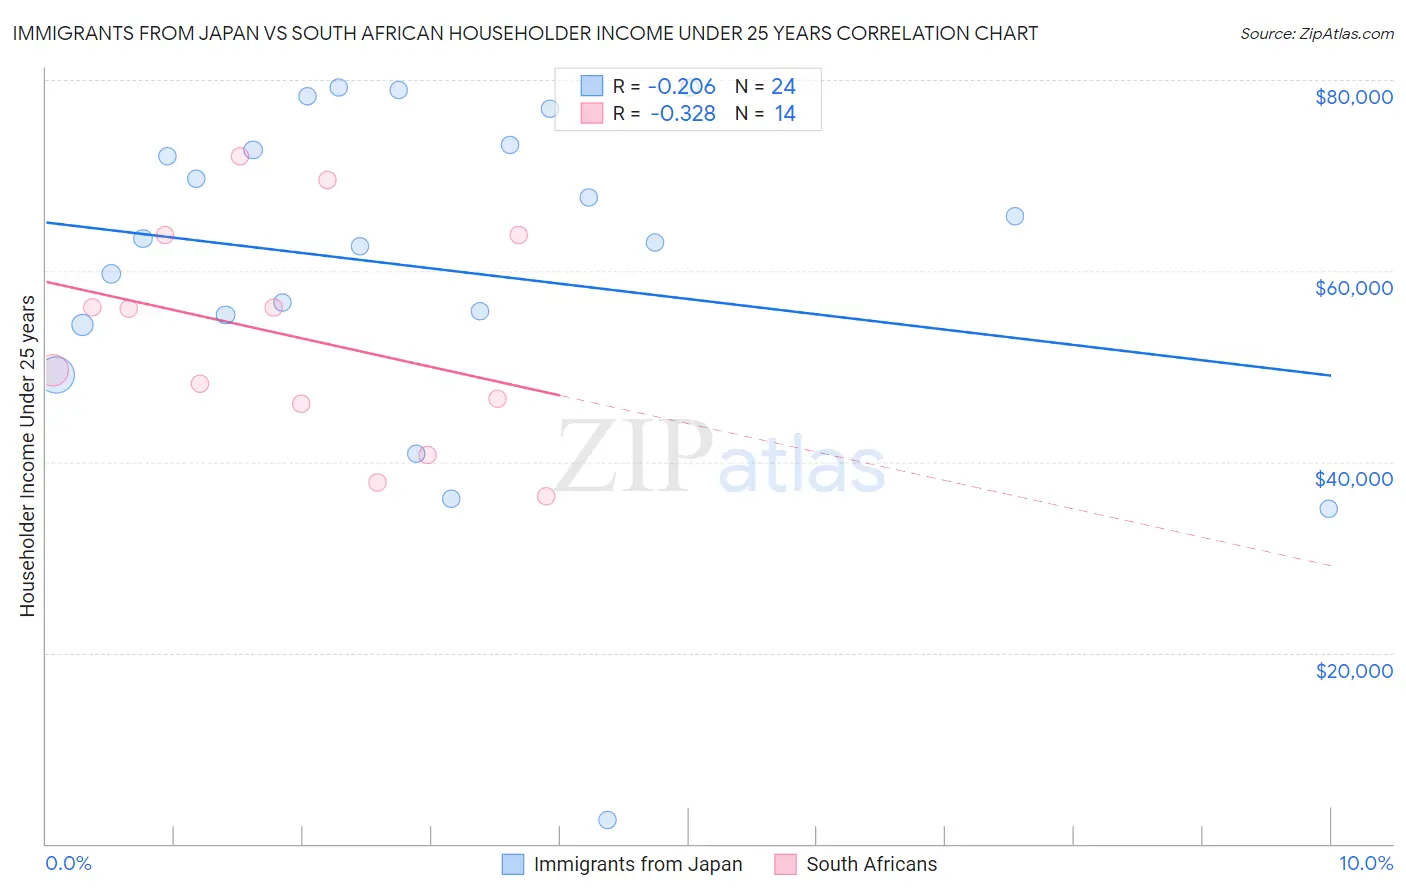 Immigrants from Japan vs South African Householder Income Under 25 years